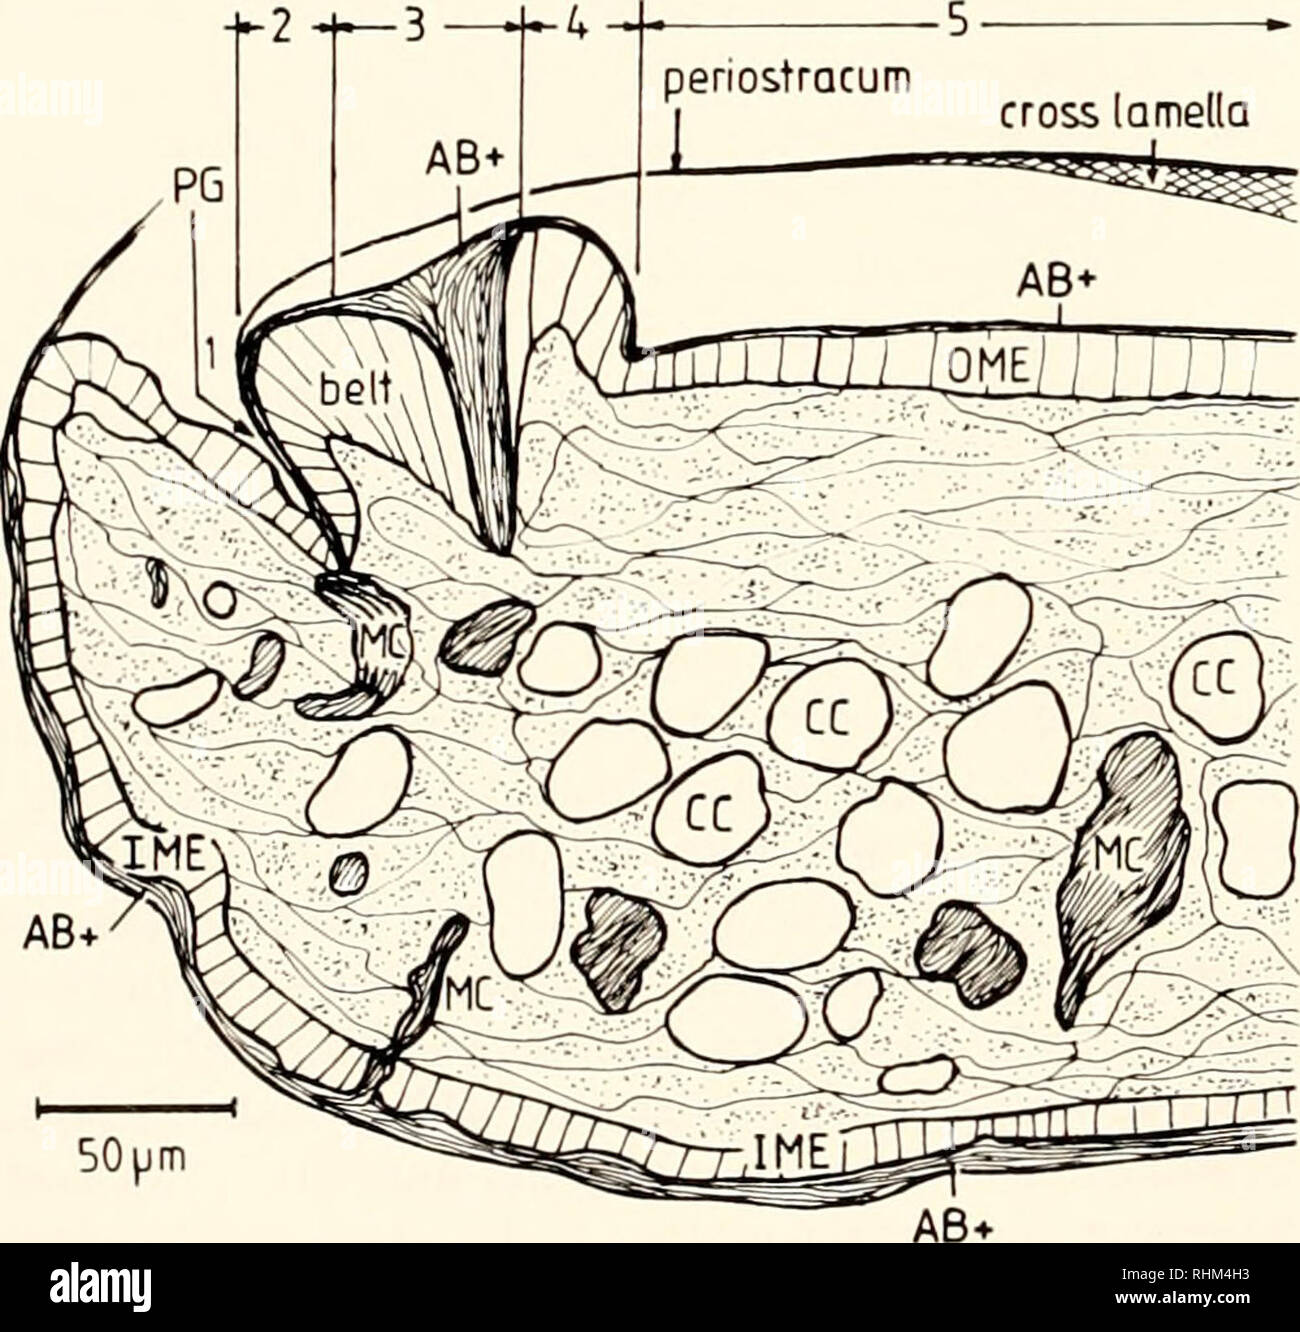 . The Biological bulletin. Biology; Zoology; Biology; Marine Biology. 238 J. C . MARXEN ET At. Table IV The bimlin^ pattern of lectins to the periostracum groove PG). the bell, and the outer mantle epithelium (OME) o/Biomphalaiia glabrata, the extracted water-sohible organic matrix fraction ISM), the 19.6-kDa protein, i nd the acid lEF 1 umds oj the B. glabrata shell Lectin Specificity PG Belt OME Whole SM 19.6 kDa protein A cidic lEF bands UEA-1 Fuc t+; ( + ) - - n.t. n.t. DBA GalNac - ( + ) - - n.t. n.t. SBA GalNac ++ + + + - (+) n.t. MPA Gal, GalNac - + + - + + + â ++ + PNA Gal + + - (+) -  Stock Photo